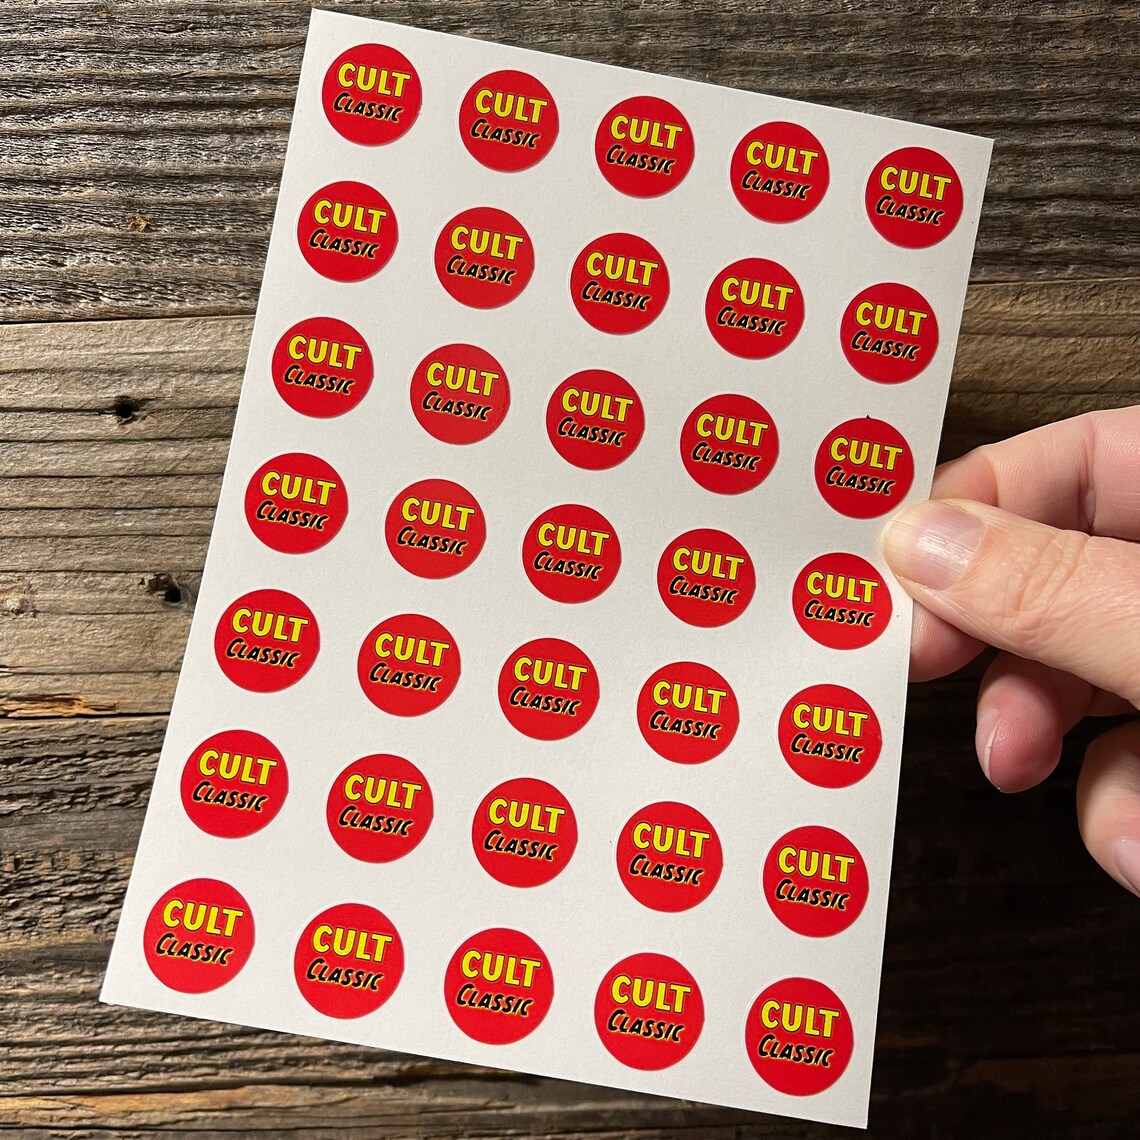 Cult Classic Section Sticker Sheet! 1 sheet of Thirty-five (35) 3/4" vinyl stickers!